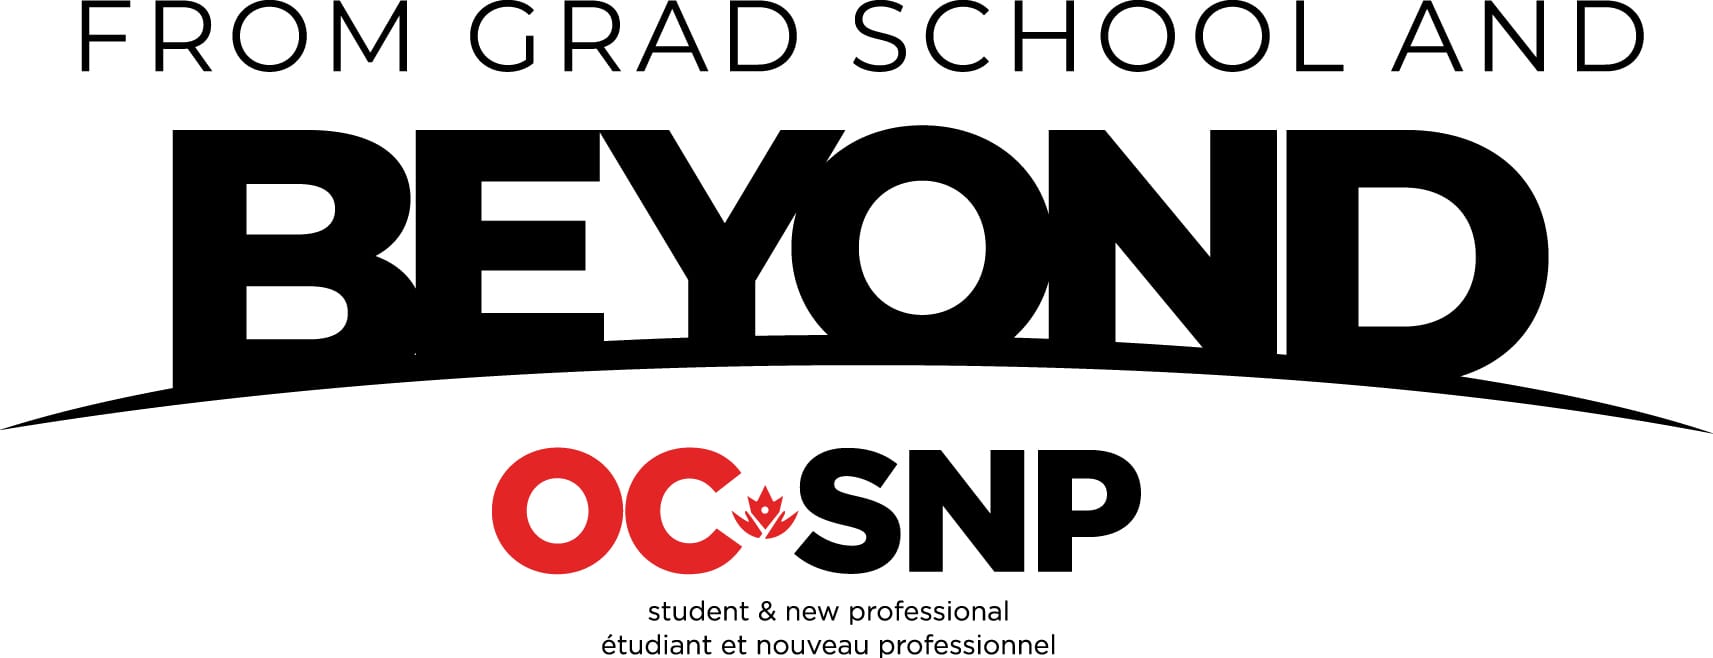 Logo of oc snp: bold text "from grad school beyond," a red stylized maple leaf above "oc snp" acronym, and "student & new professional" tagline in french and english.